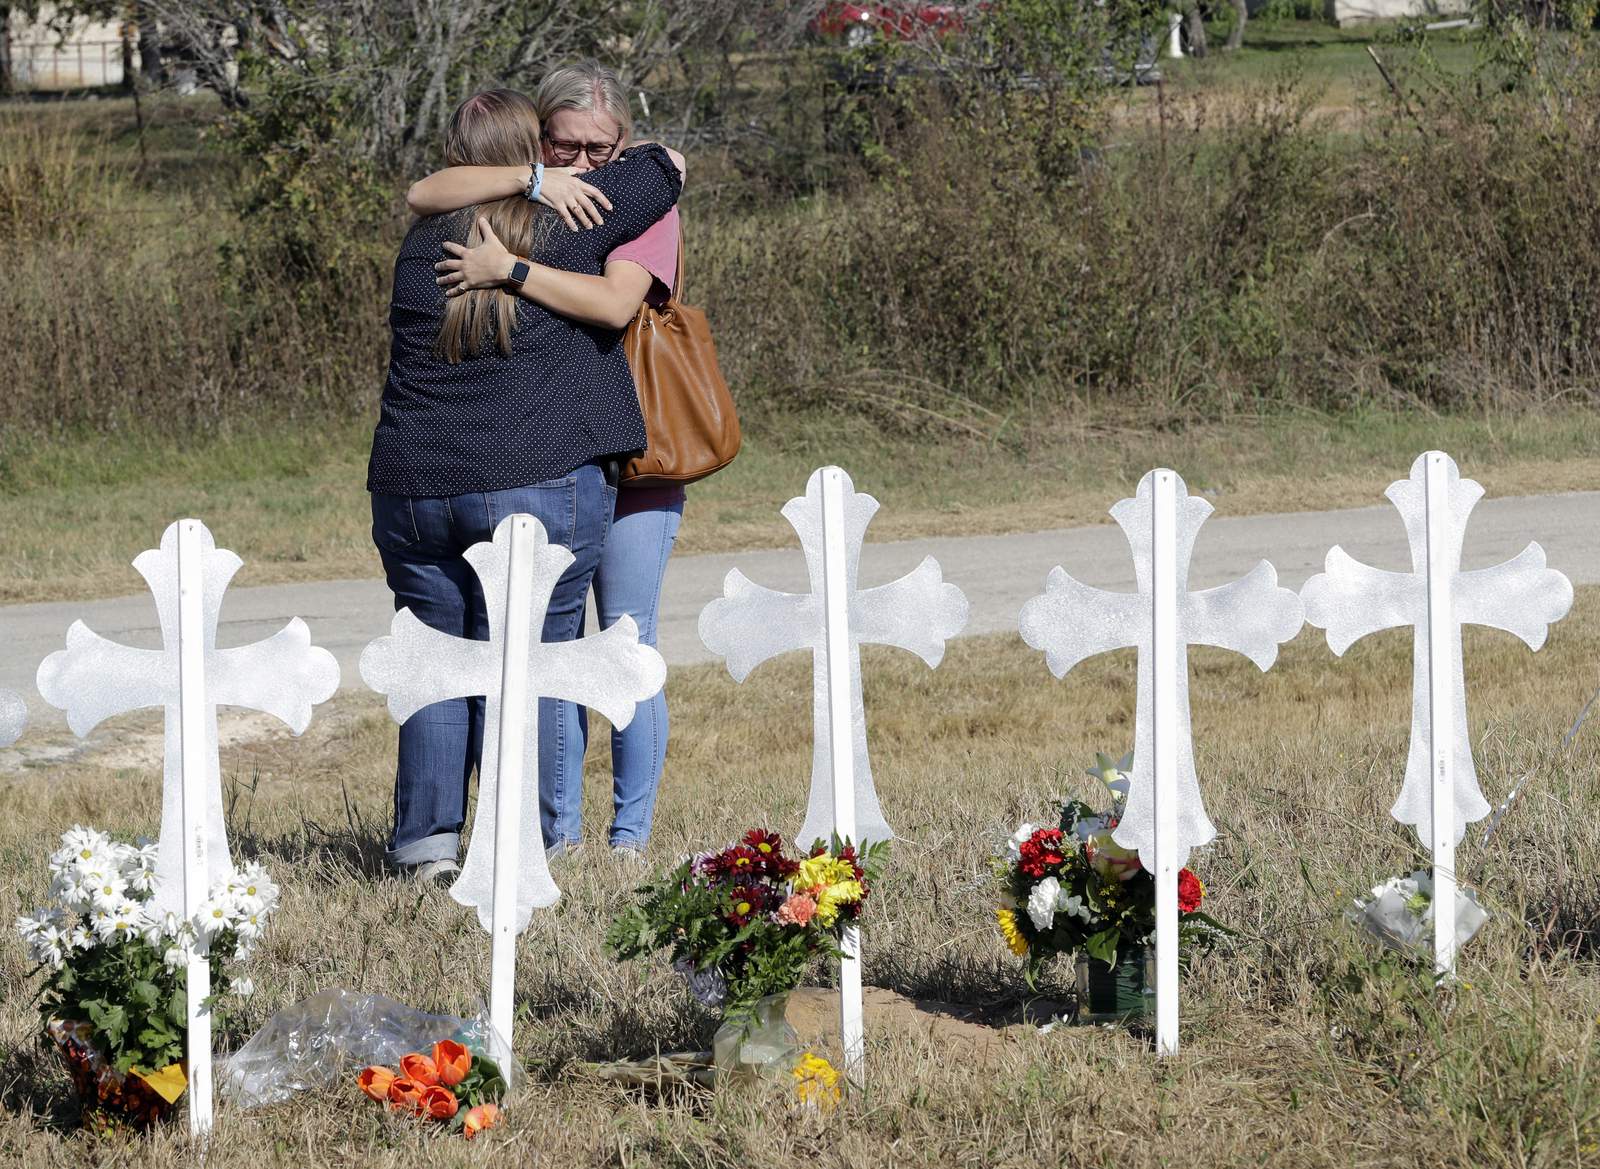 Shooter’s parents testify during second day of Sutherland Springs church shooting civil trial